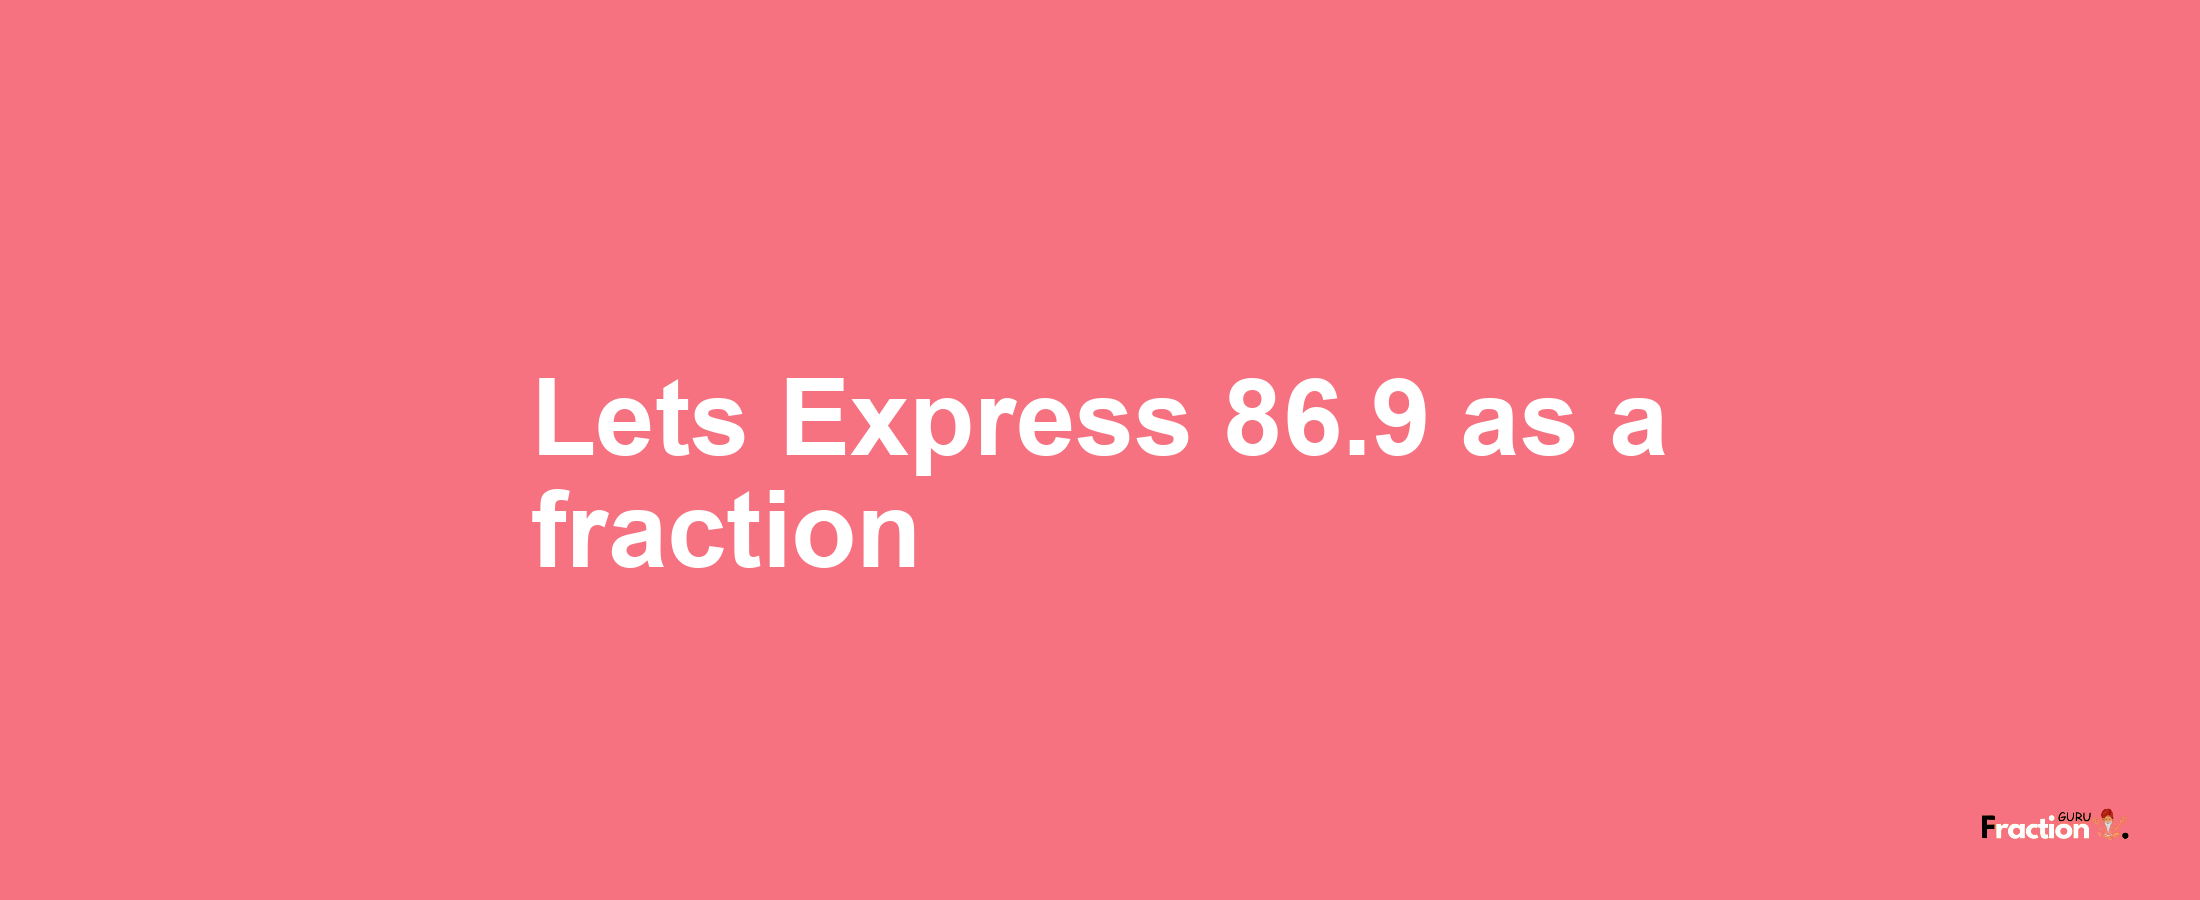 Lets Express 86.9 as afraction